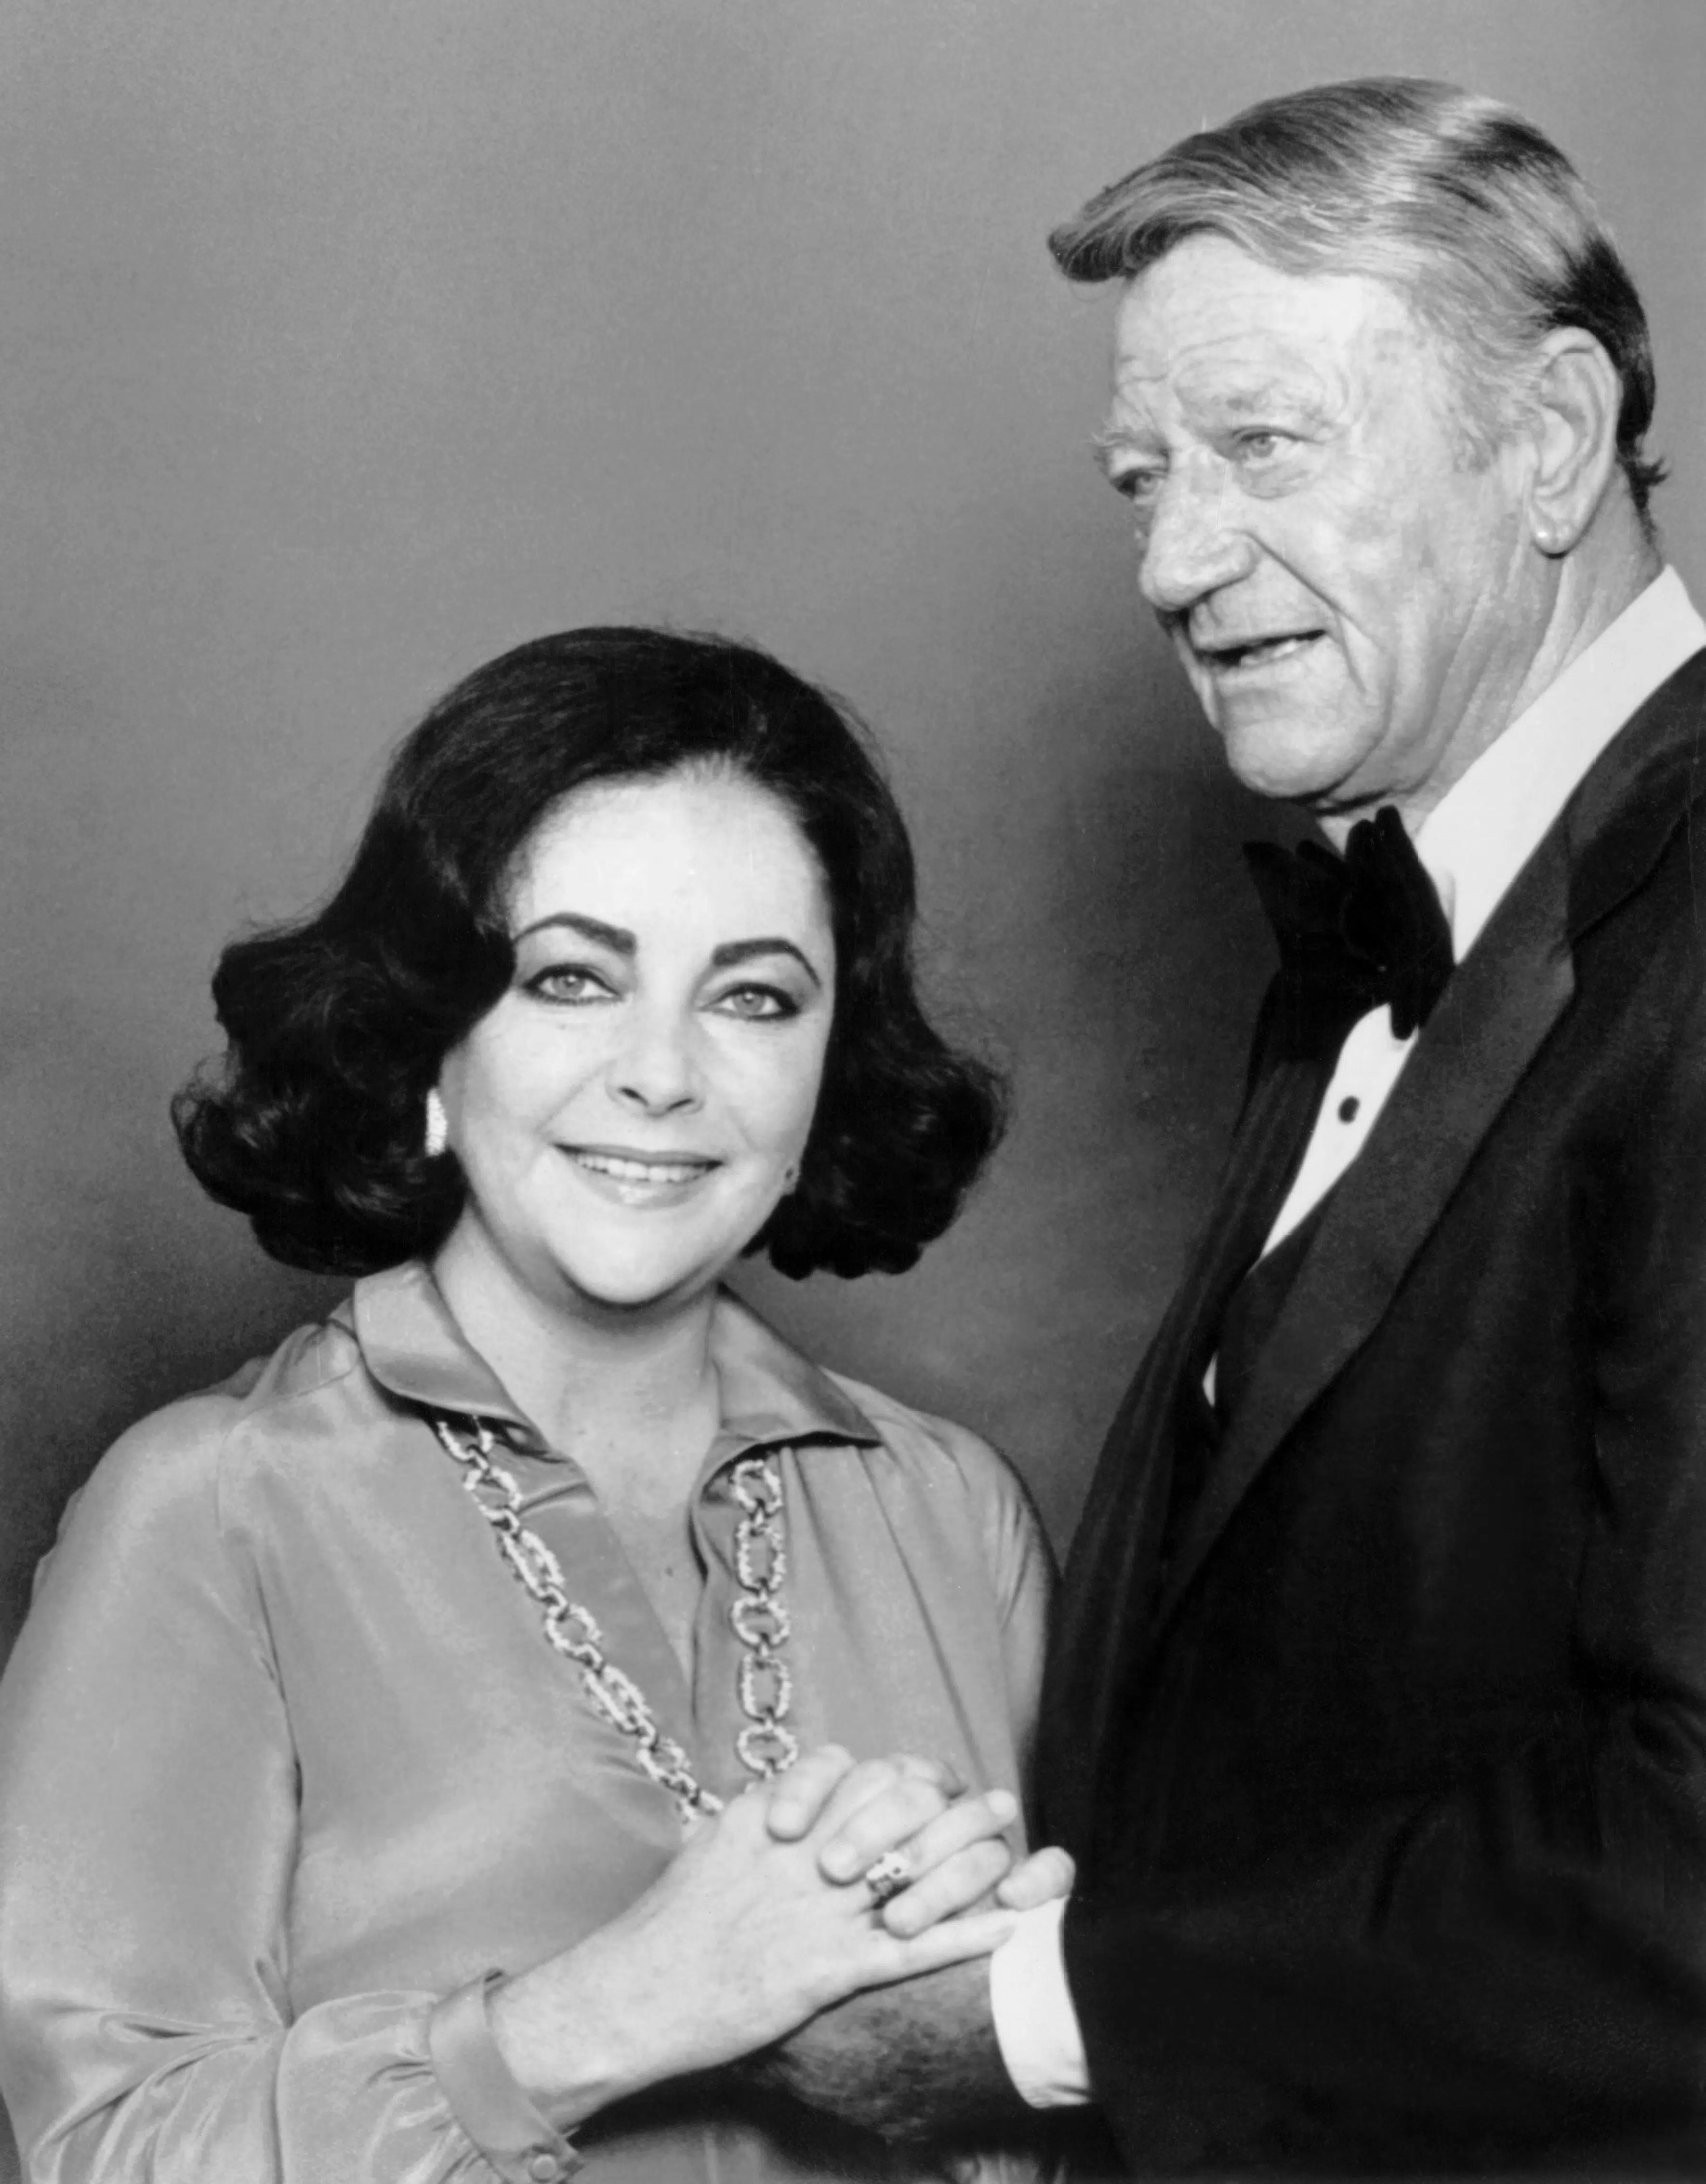 GENERAL ELECTRIC'S ALL-STAR ANNIVERSARY, from left, Elizabeth Taylor, John Wayne, aired September 29, 1978